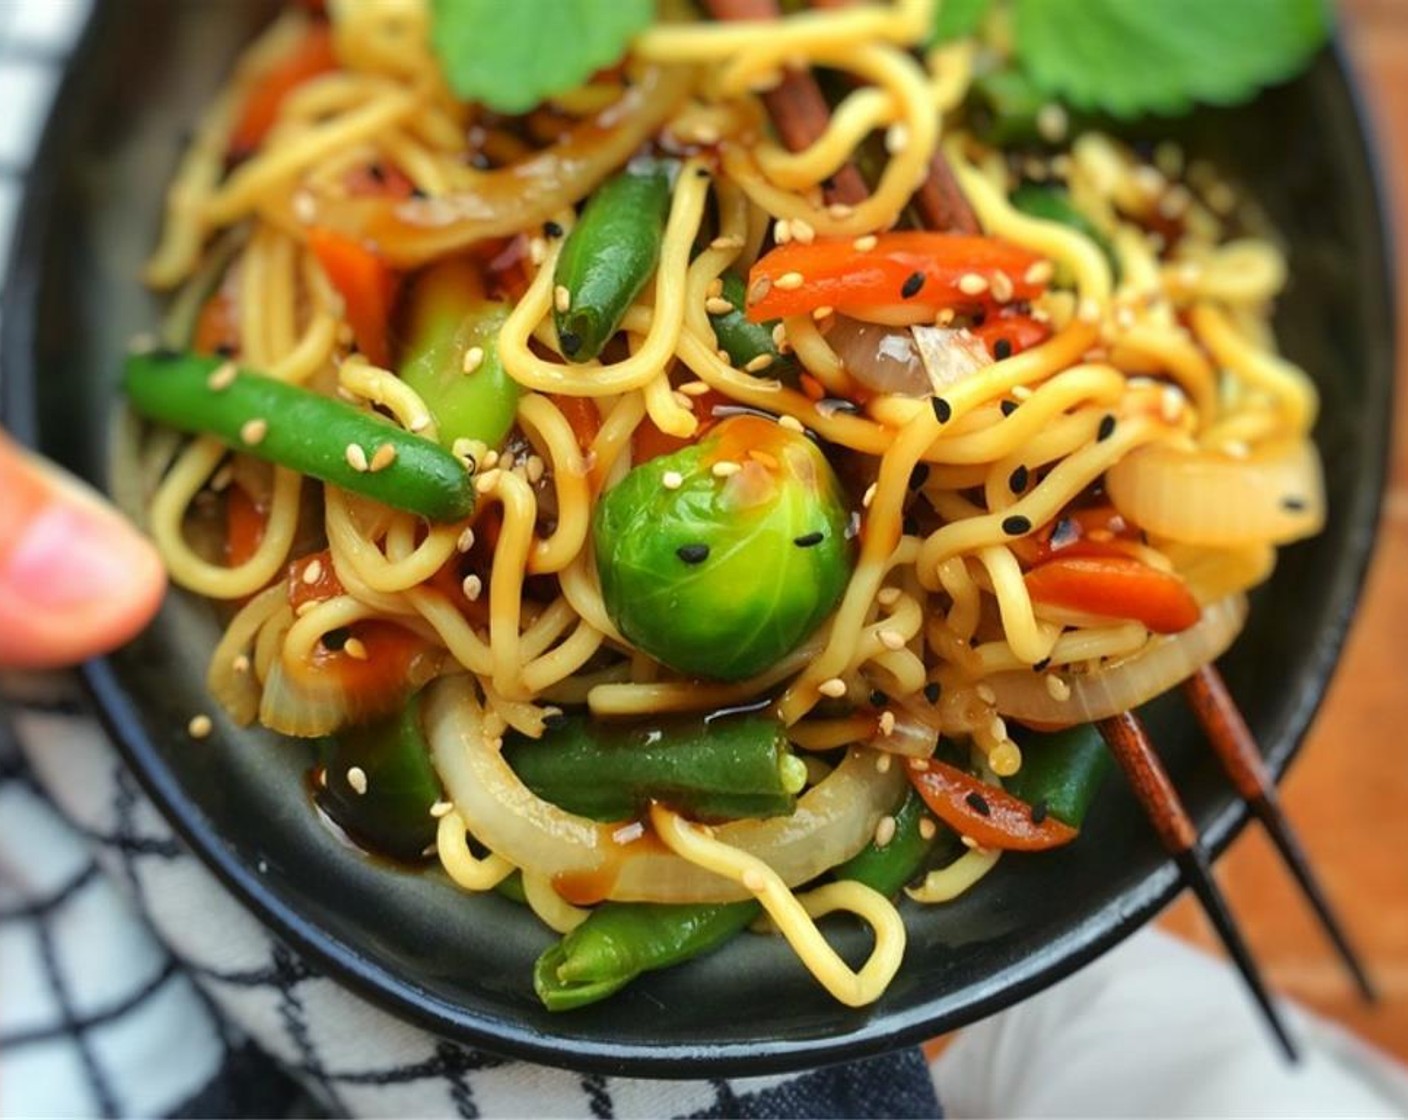 step 6 Take the wok off the heat and scoop the stir fried Chinese egg noodles and vegetables into large bowls. Drizzle with the remaining oyster sauce marinade if there’s any left in the wok. Sprinkle the noodles with Sesame Seeds (1 tsp) and serve immediately.